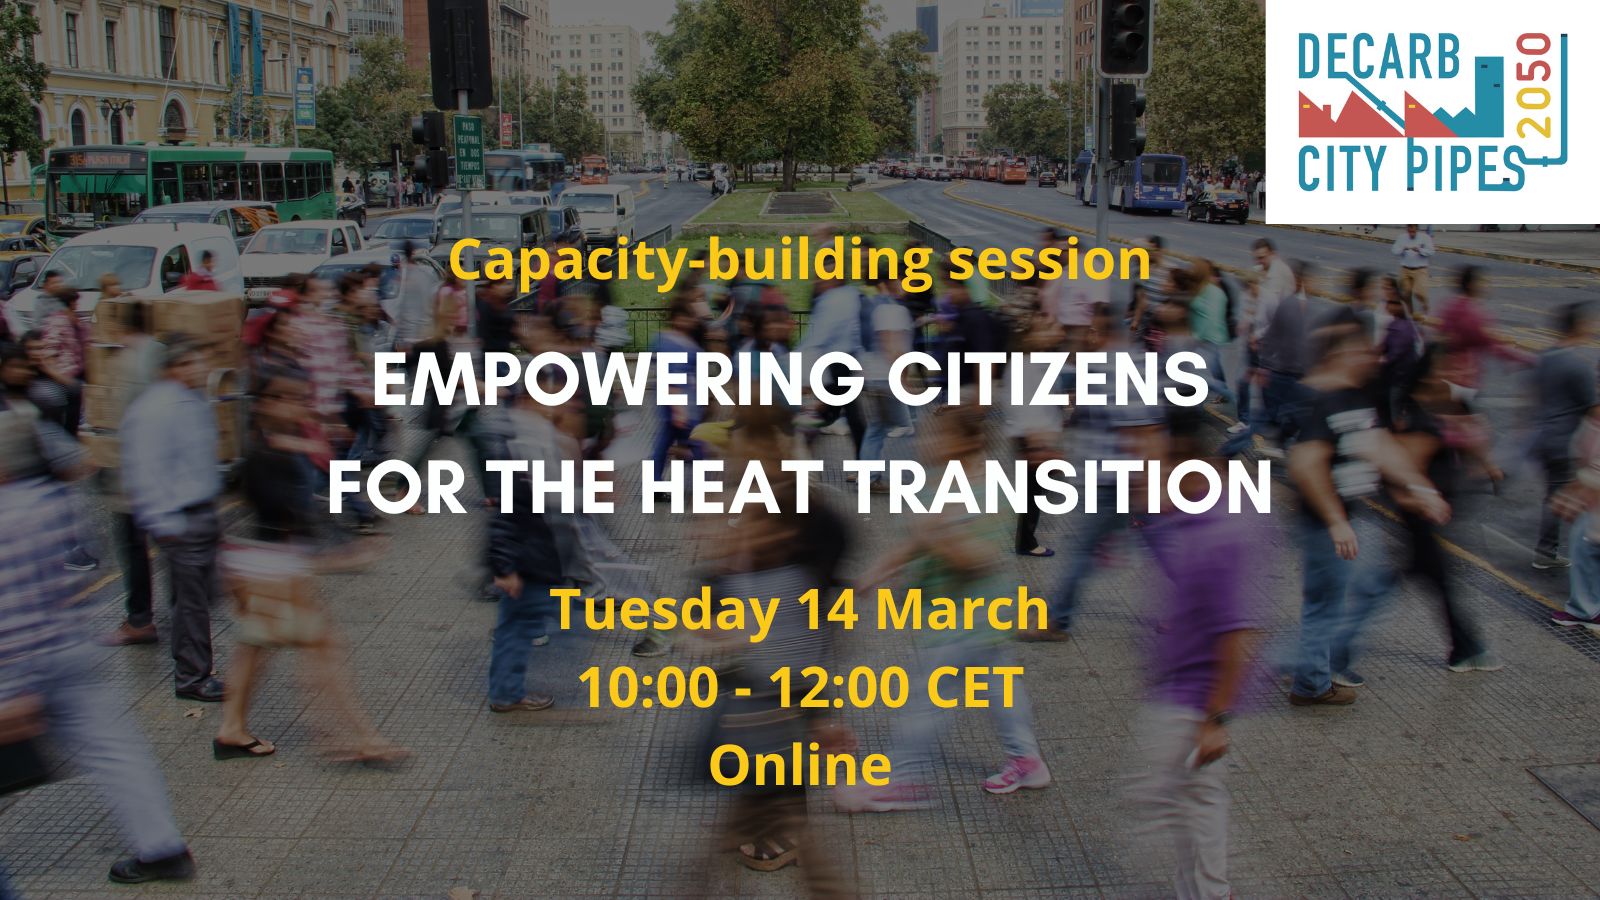 Decarb City Pipes 2050 - Empowering citizens for the heat transition